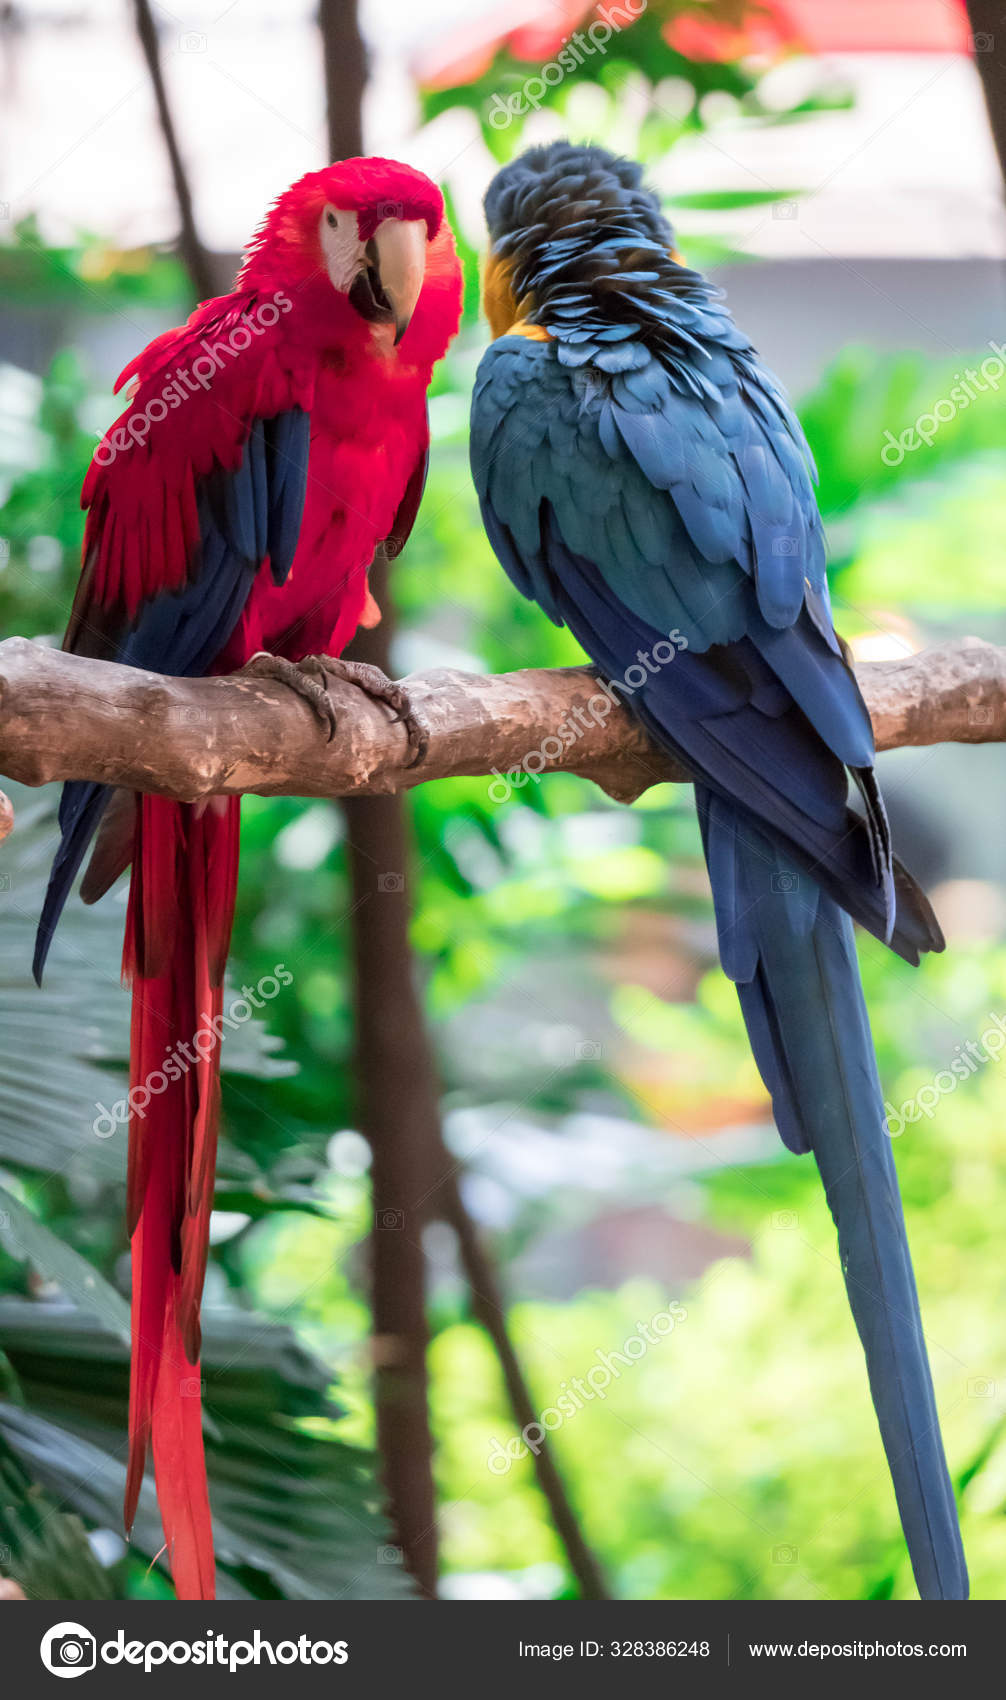 Macaw - Ara macao, large beautiful parrot from Stock Photo by 328386248